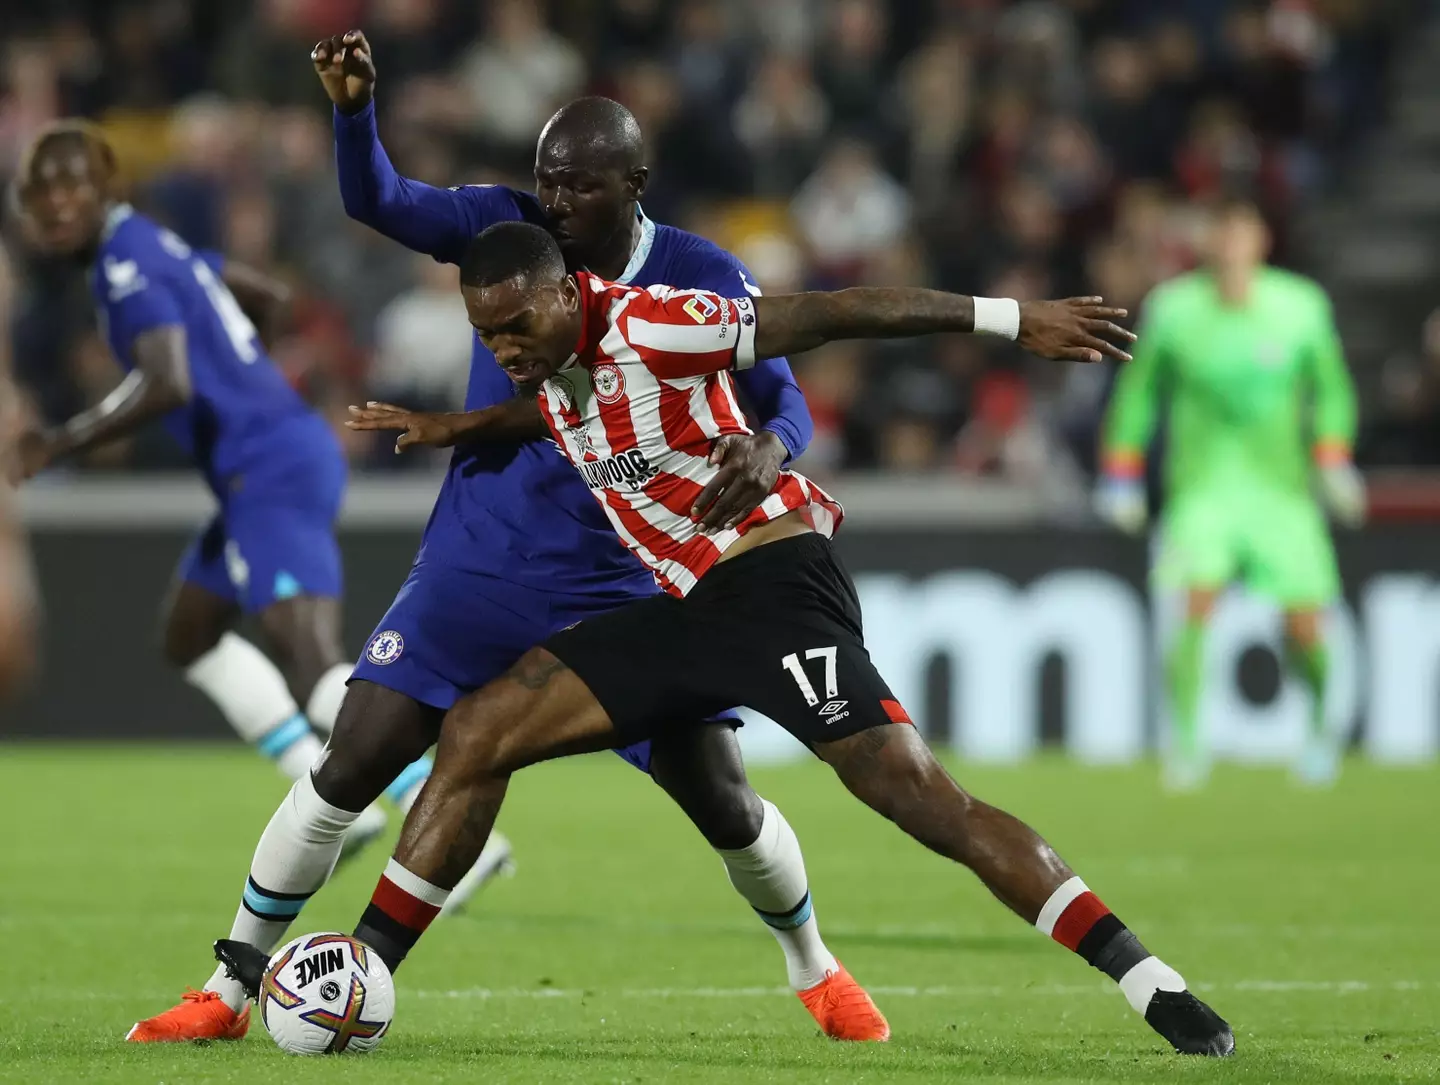 Ivan Toney of Brentford and Kalidou Koulibaly of Chelsea challenge for the ball during the Premier League match. (Alamy)